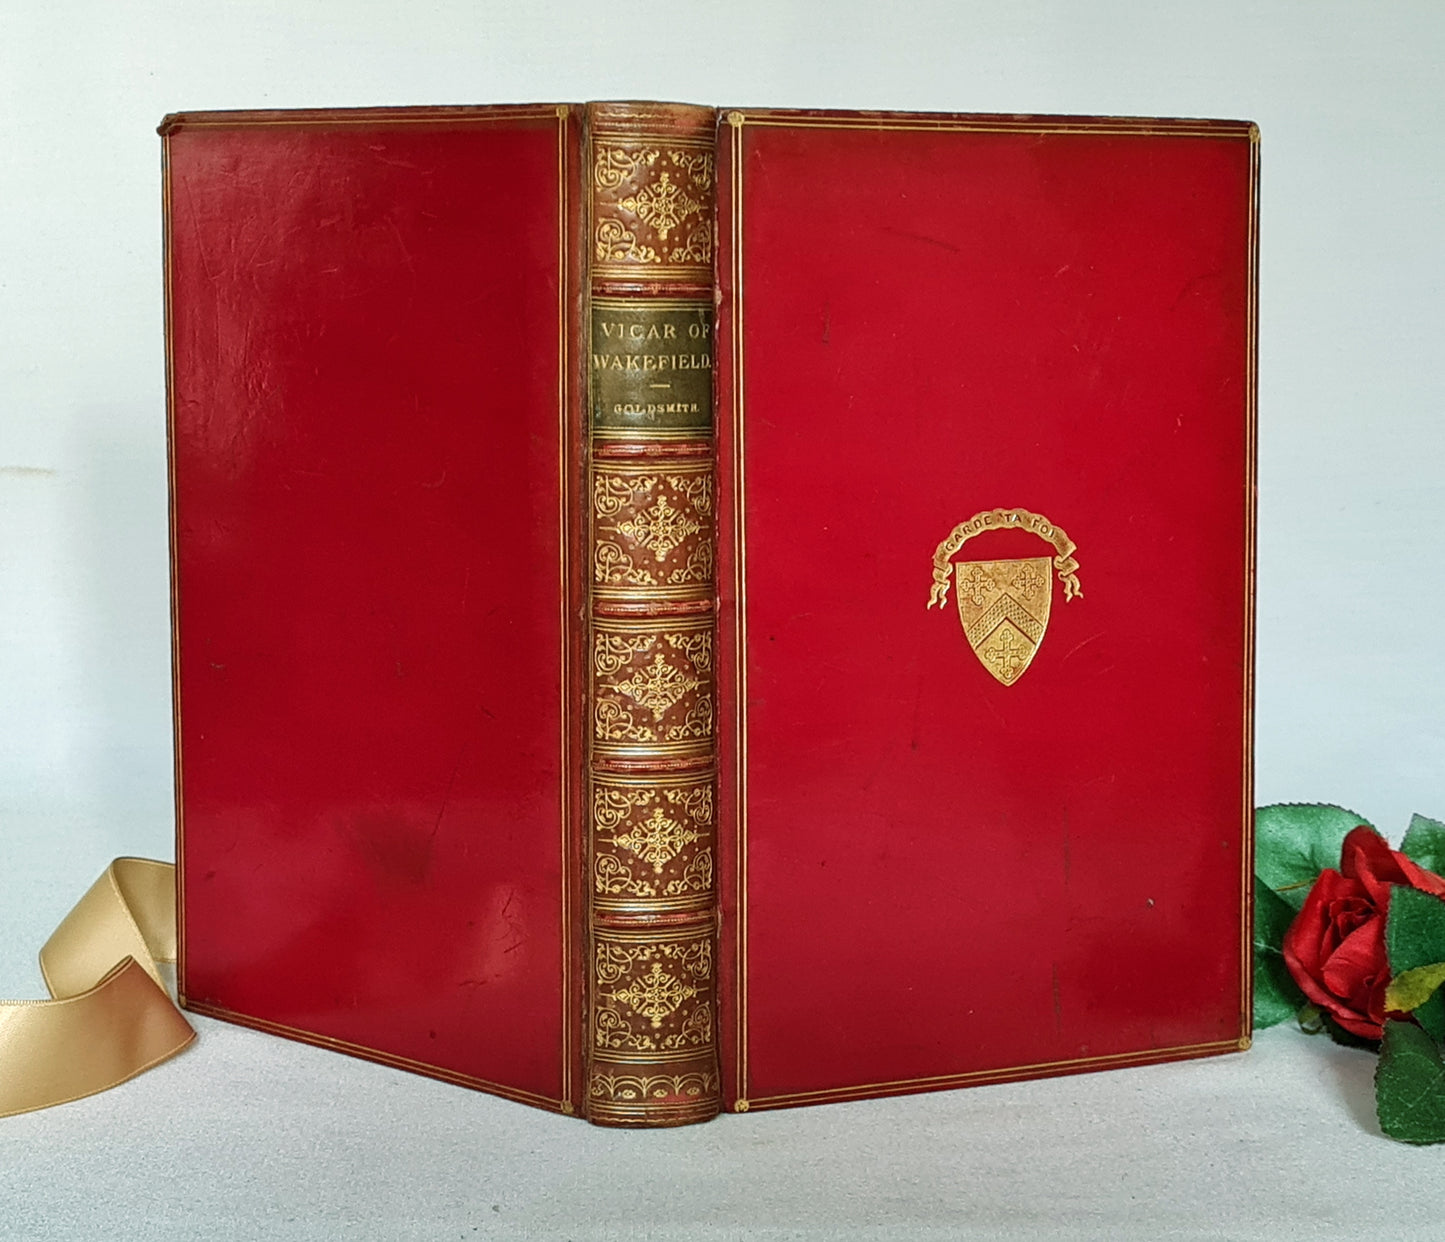 1883 The Vicar of Wakefield by Oliver Goldsmith / Bickers & Son London / Beautifully Illustrated / In a Lovely Full Polished Leather Binding